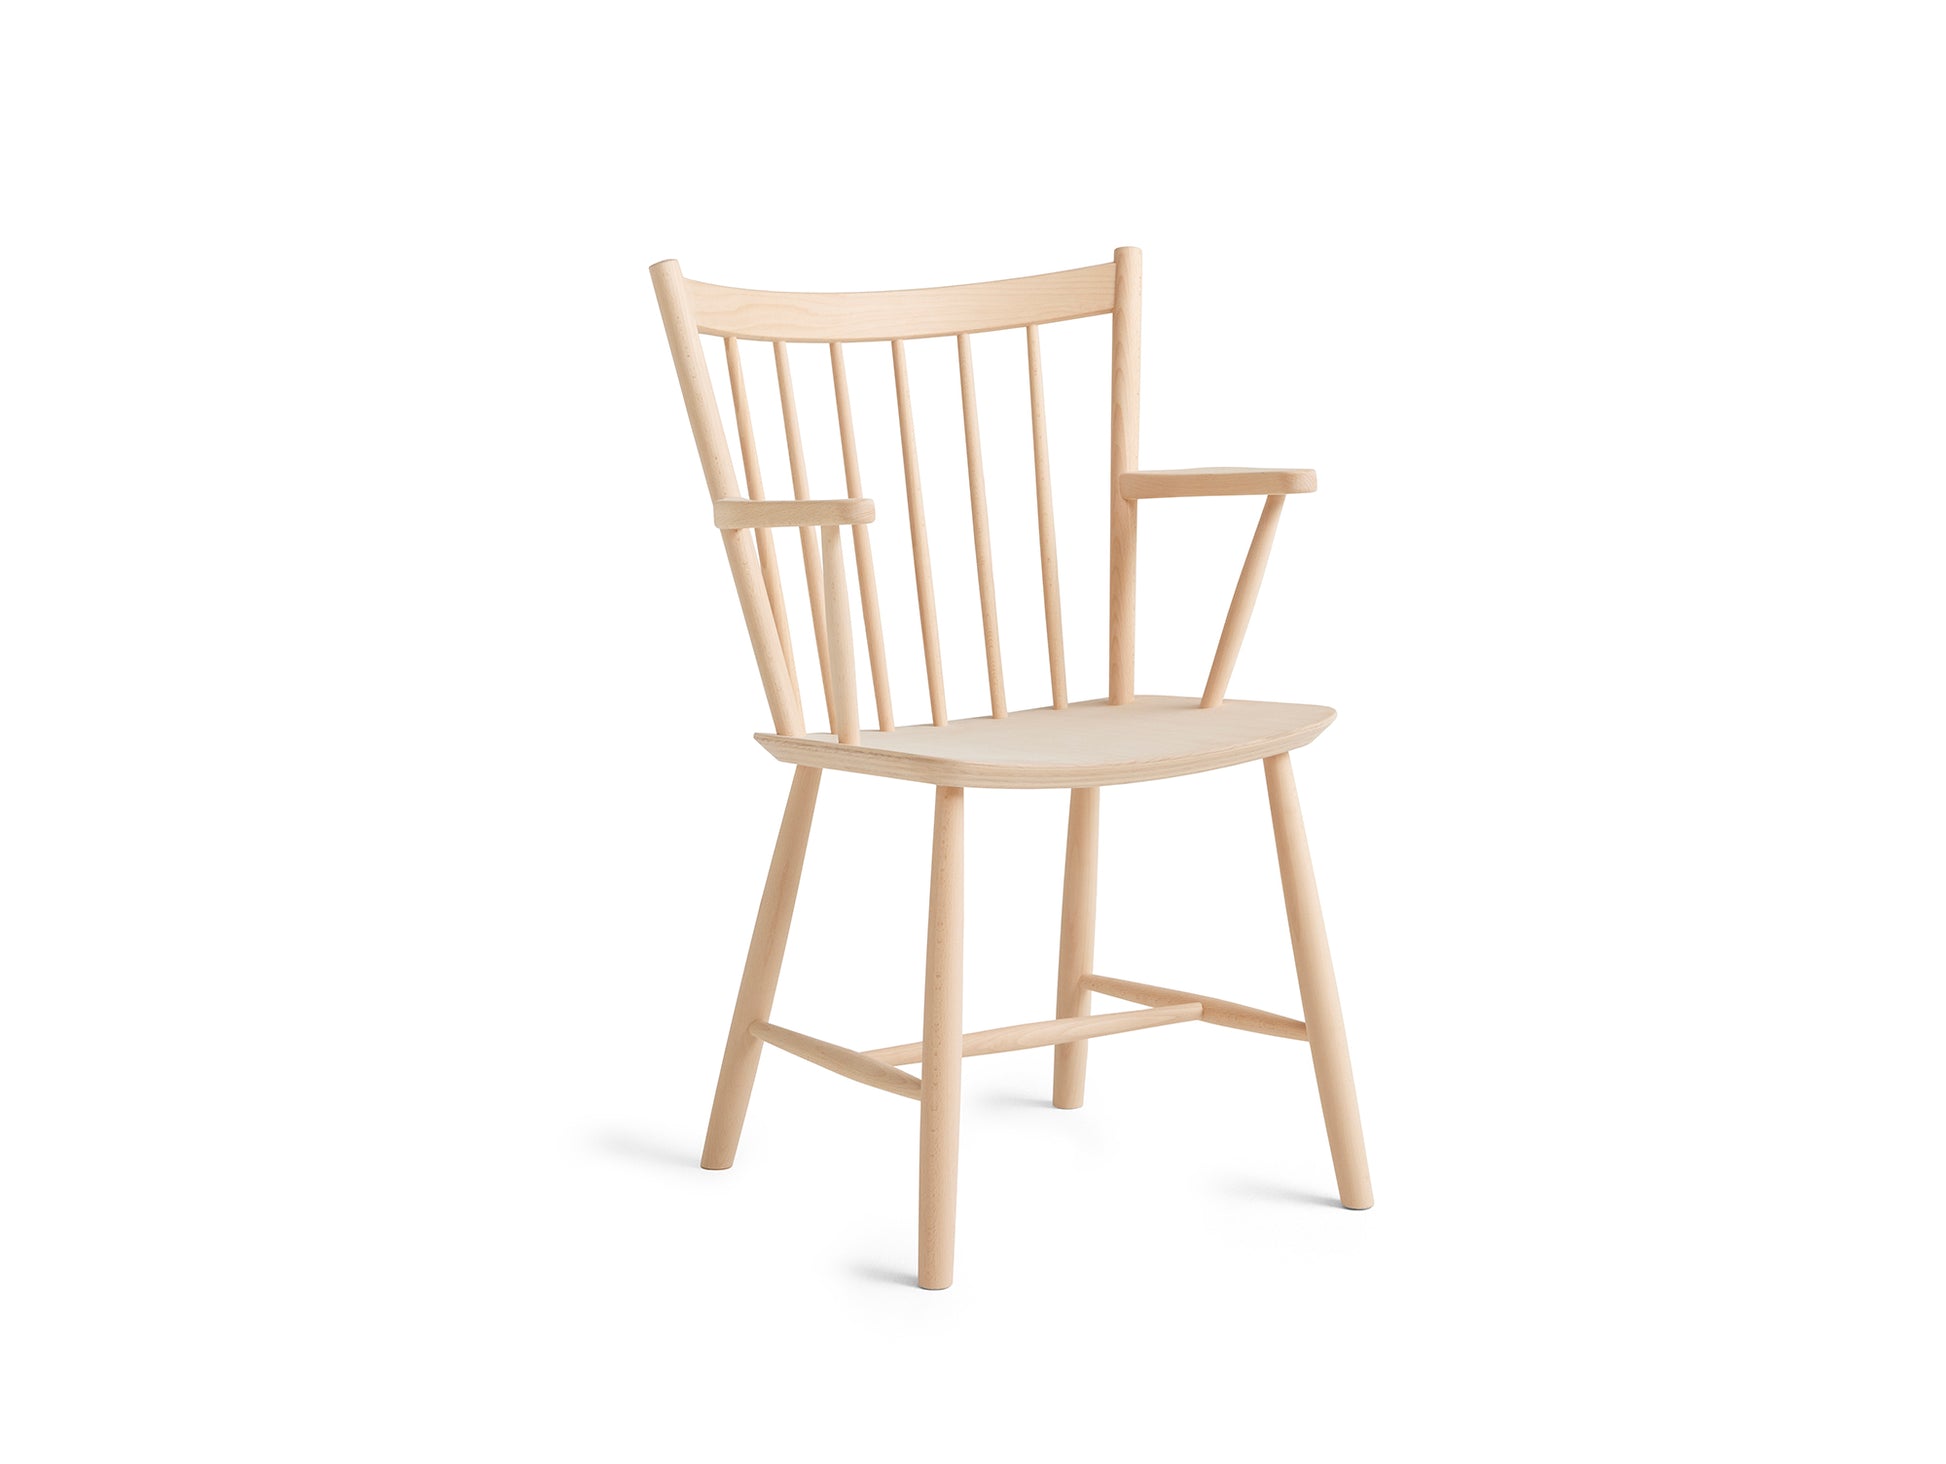 Untreated Natural Beech J42 chair by HAY